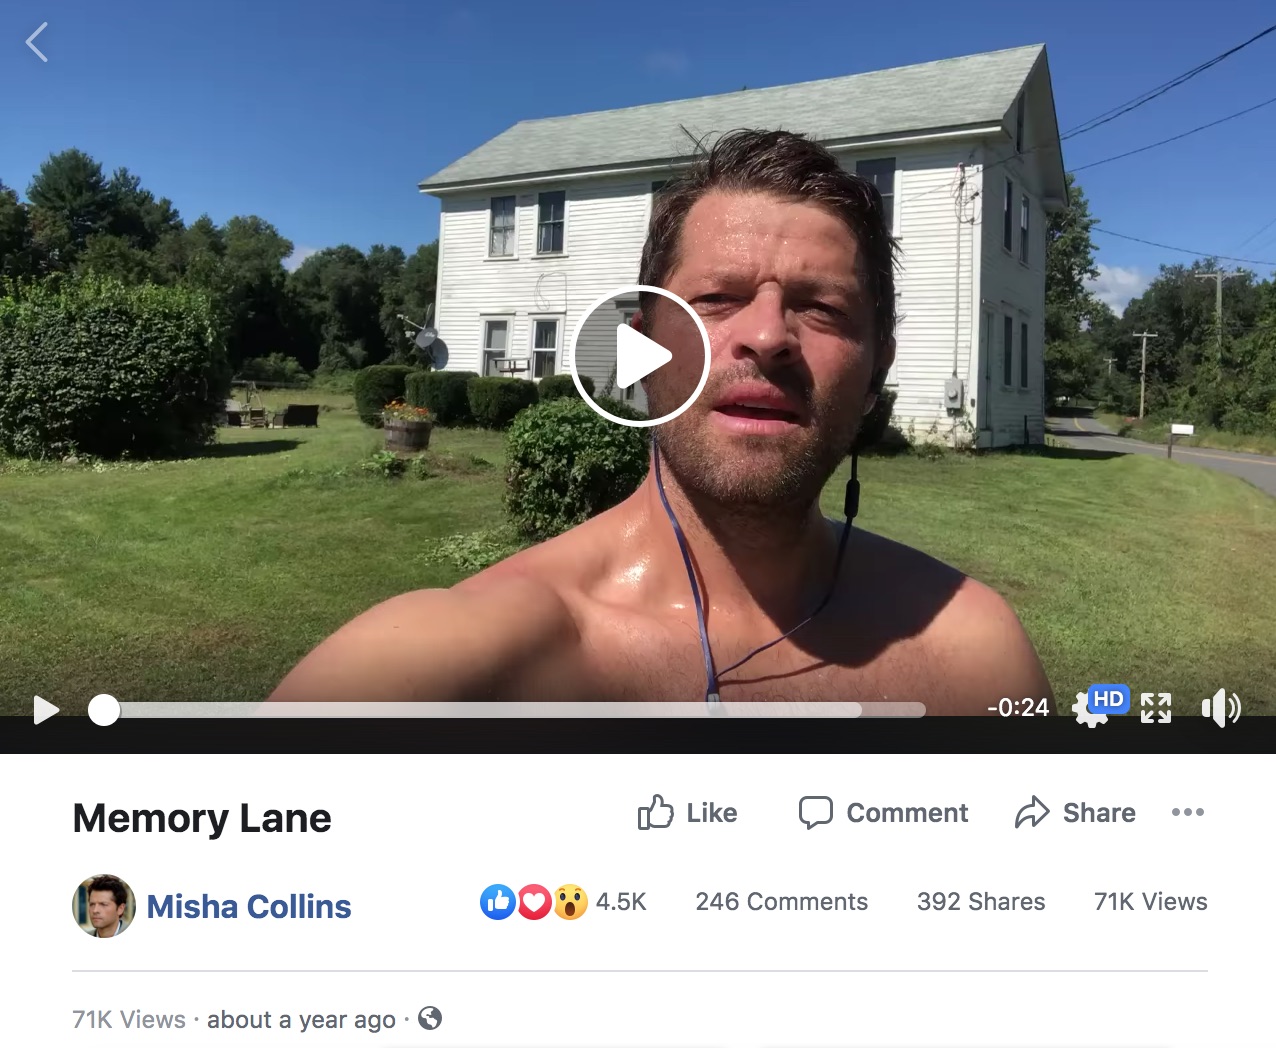 Color screenshot of a livestream video posted to Facebook by Misha Collins from account officialmisha dated September 18, 2018. Still frame shows Misha Collins, shirtless and wearing earbuds, standing in the yard behind a three-story white house by a small road.